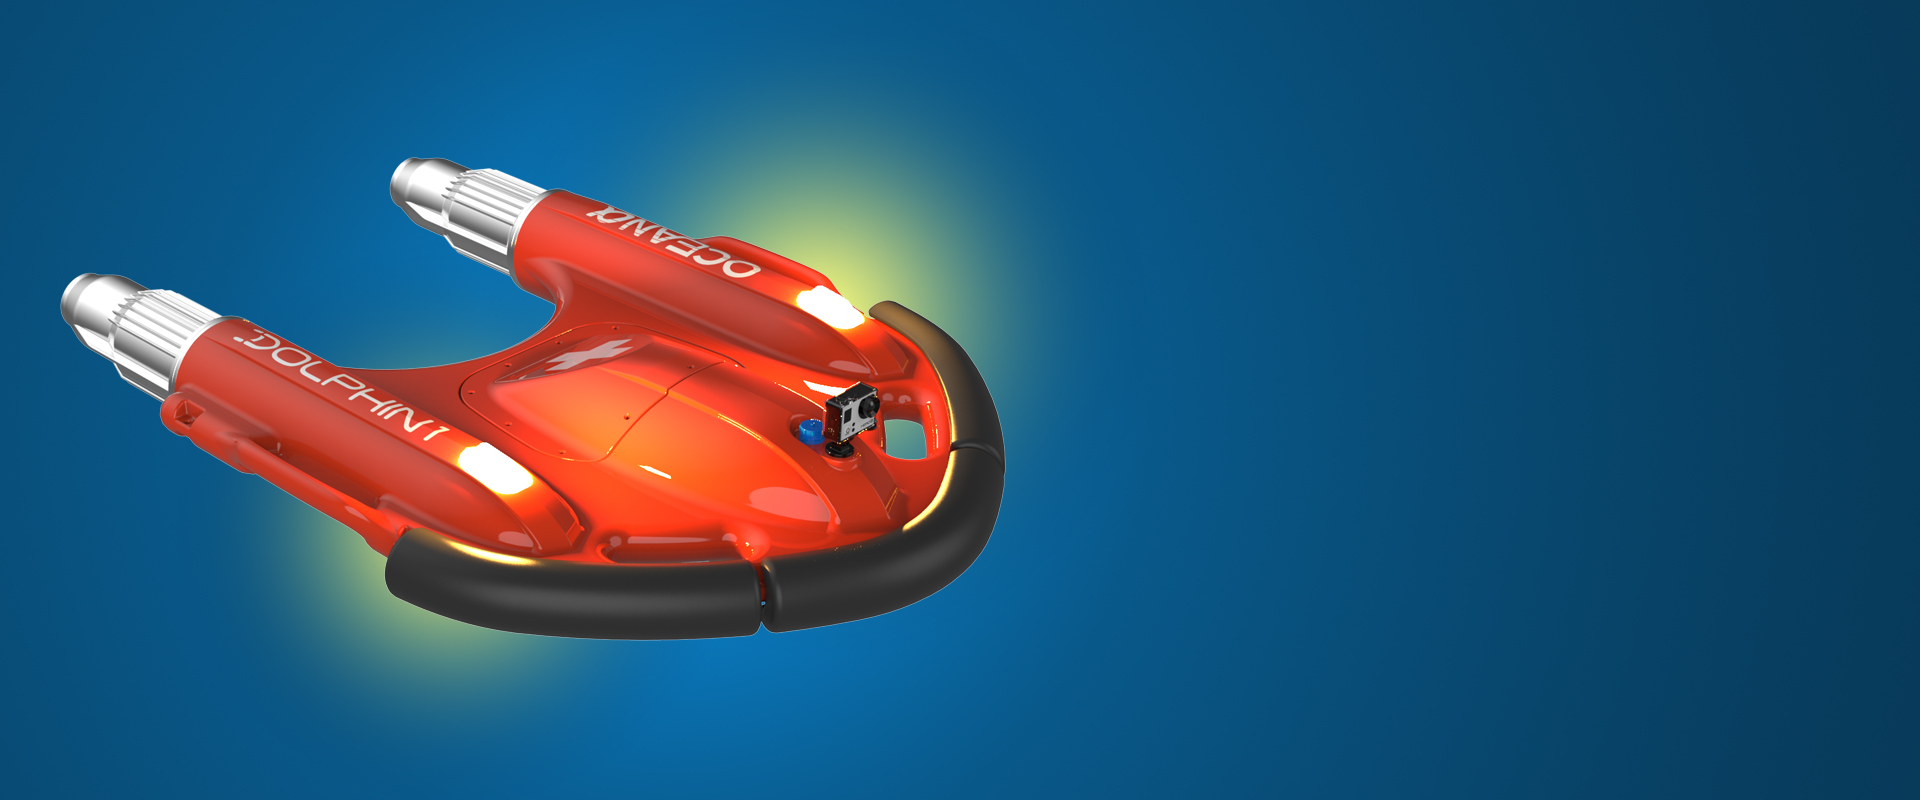 eye-catching signal lights of dolphin 1 remote control lifebuoy